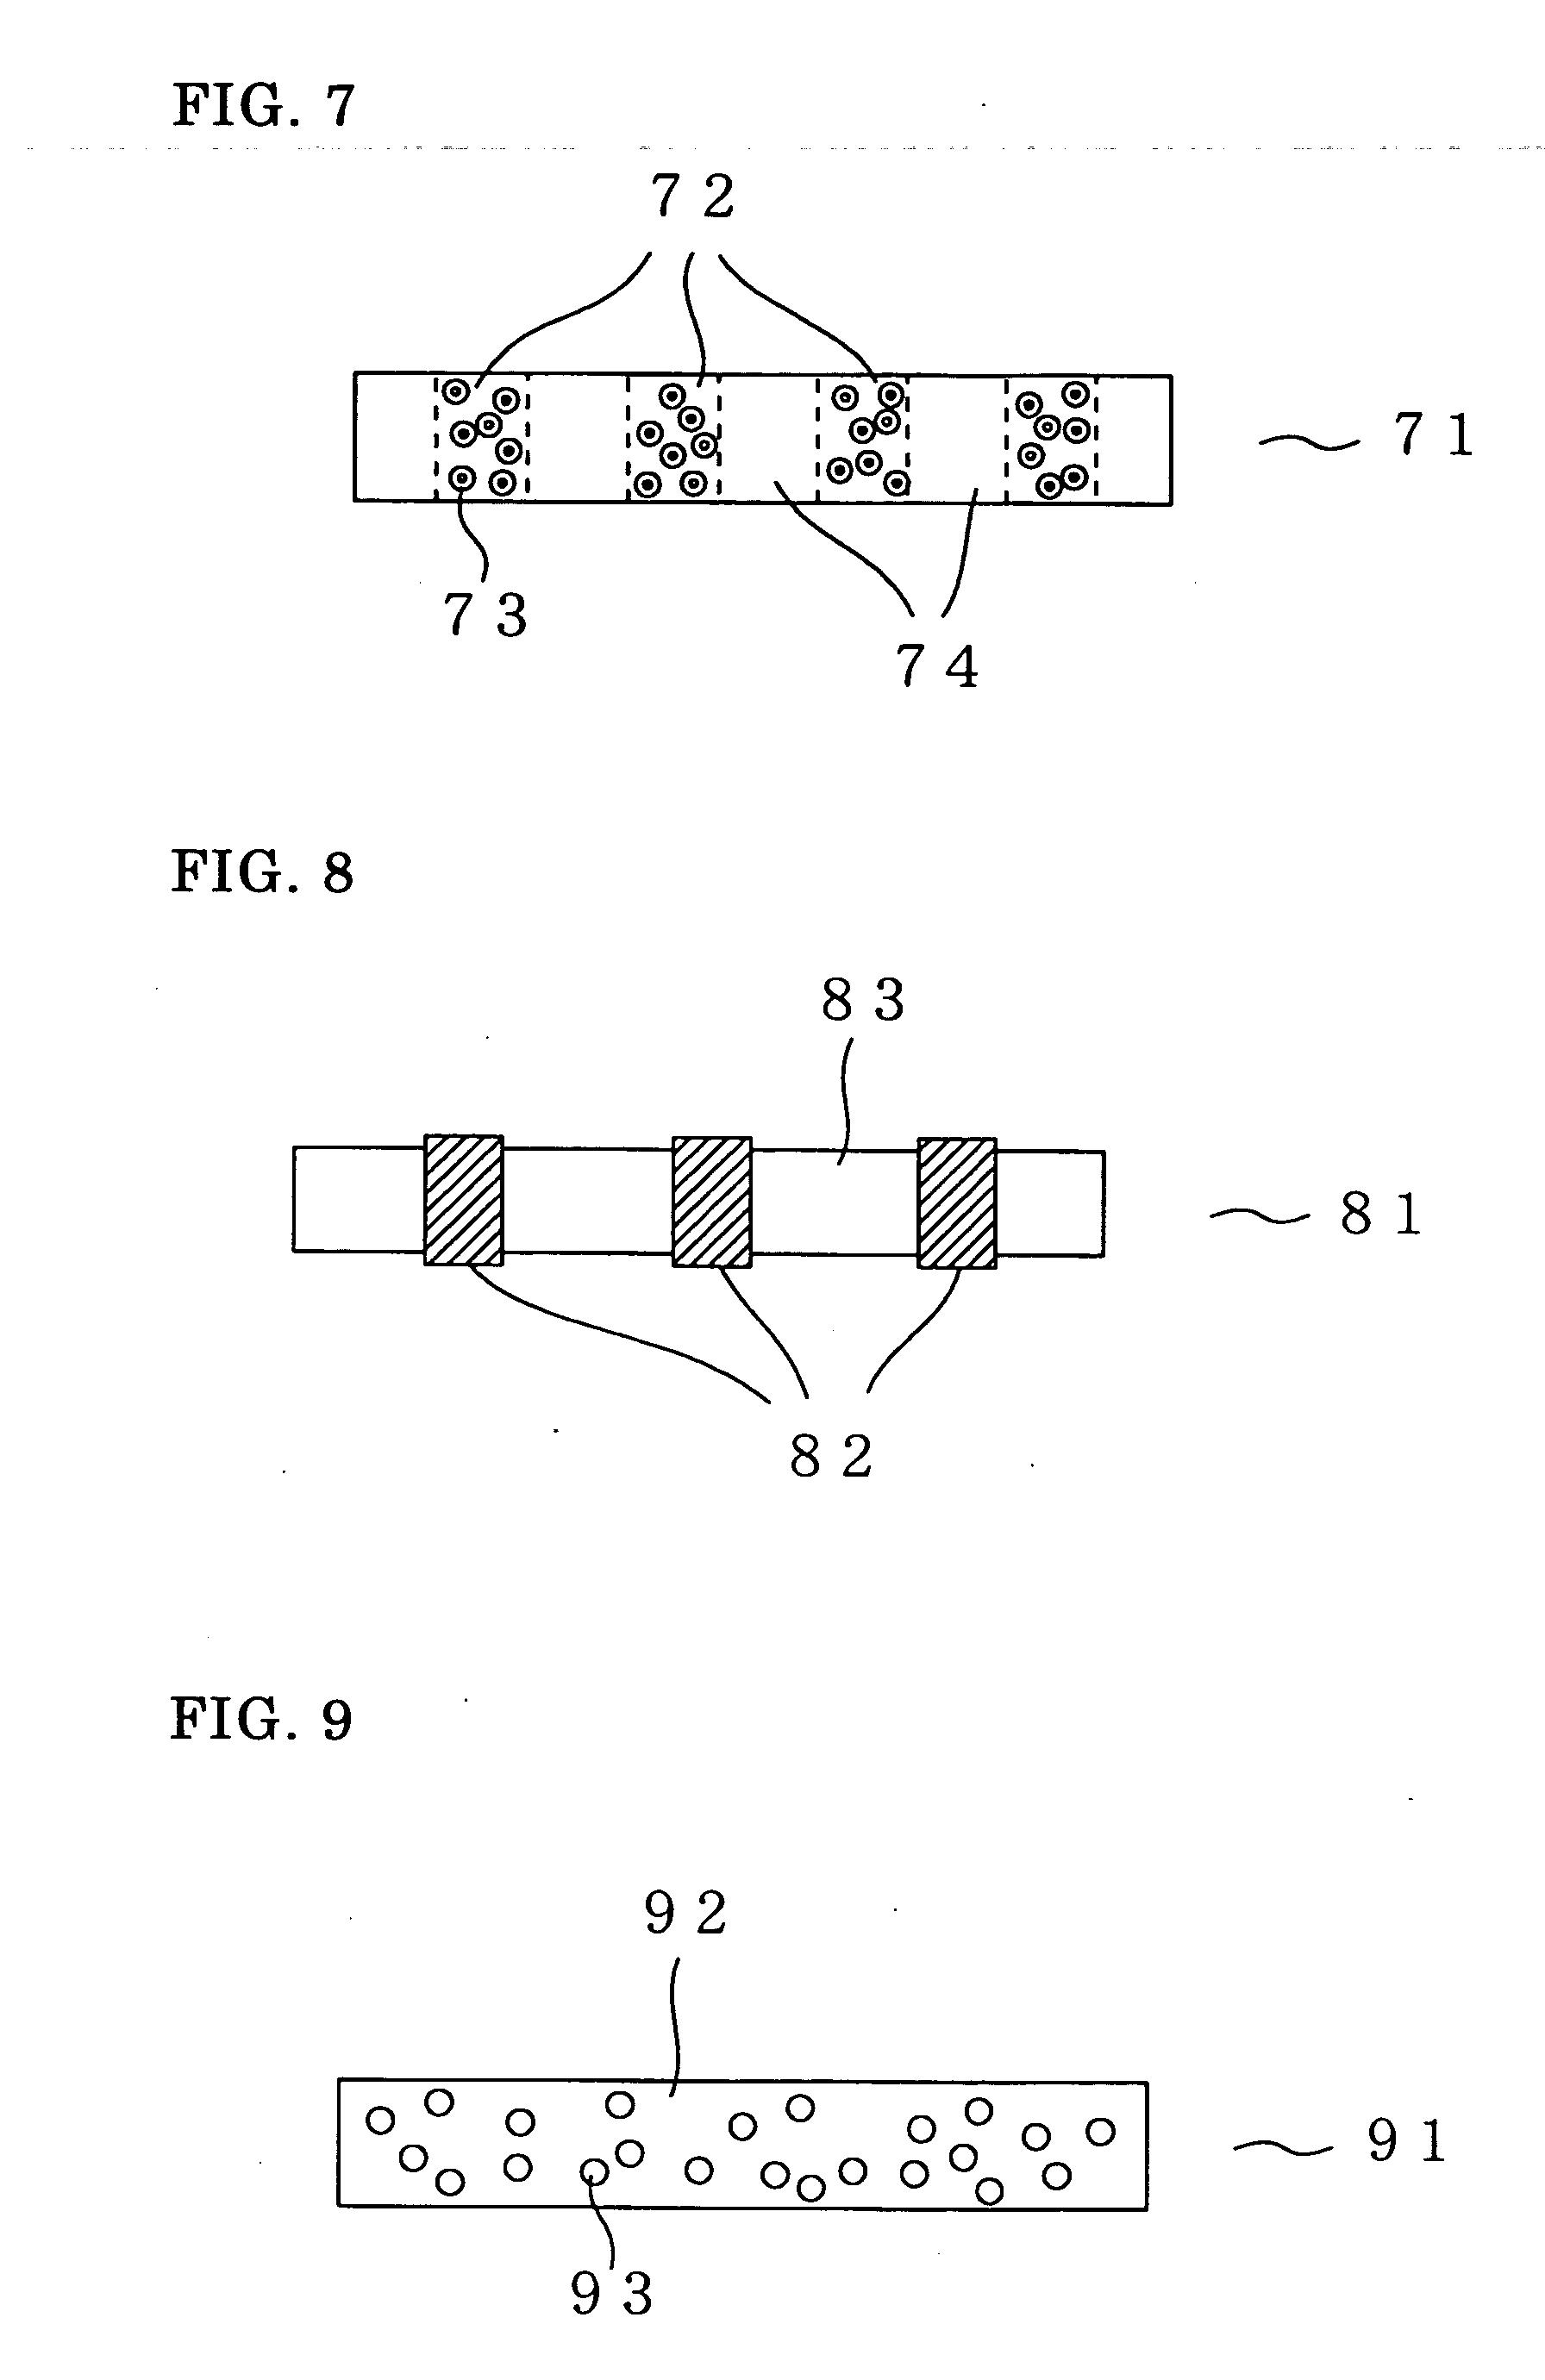 Anisotropic electrically conductive film and method of producing the same